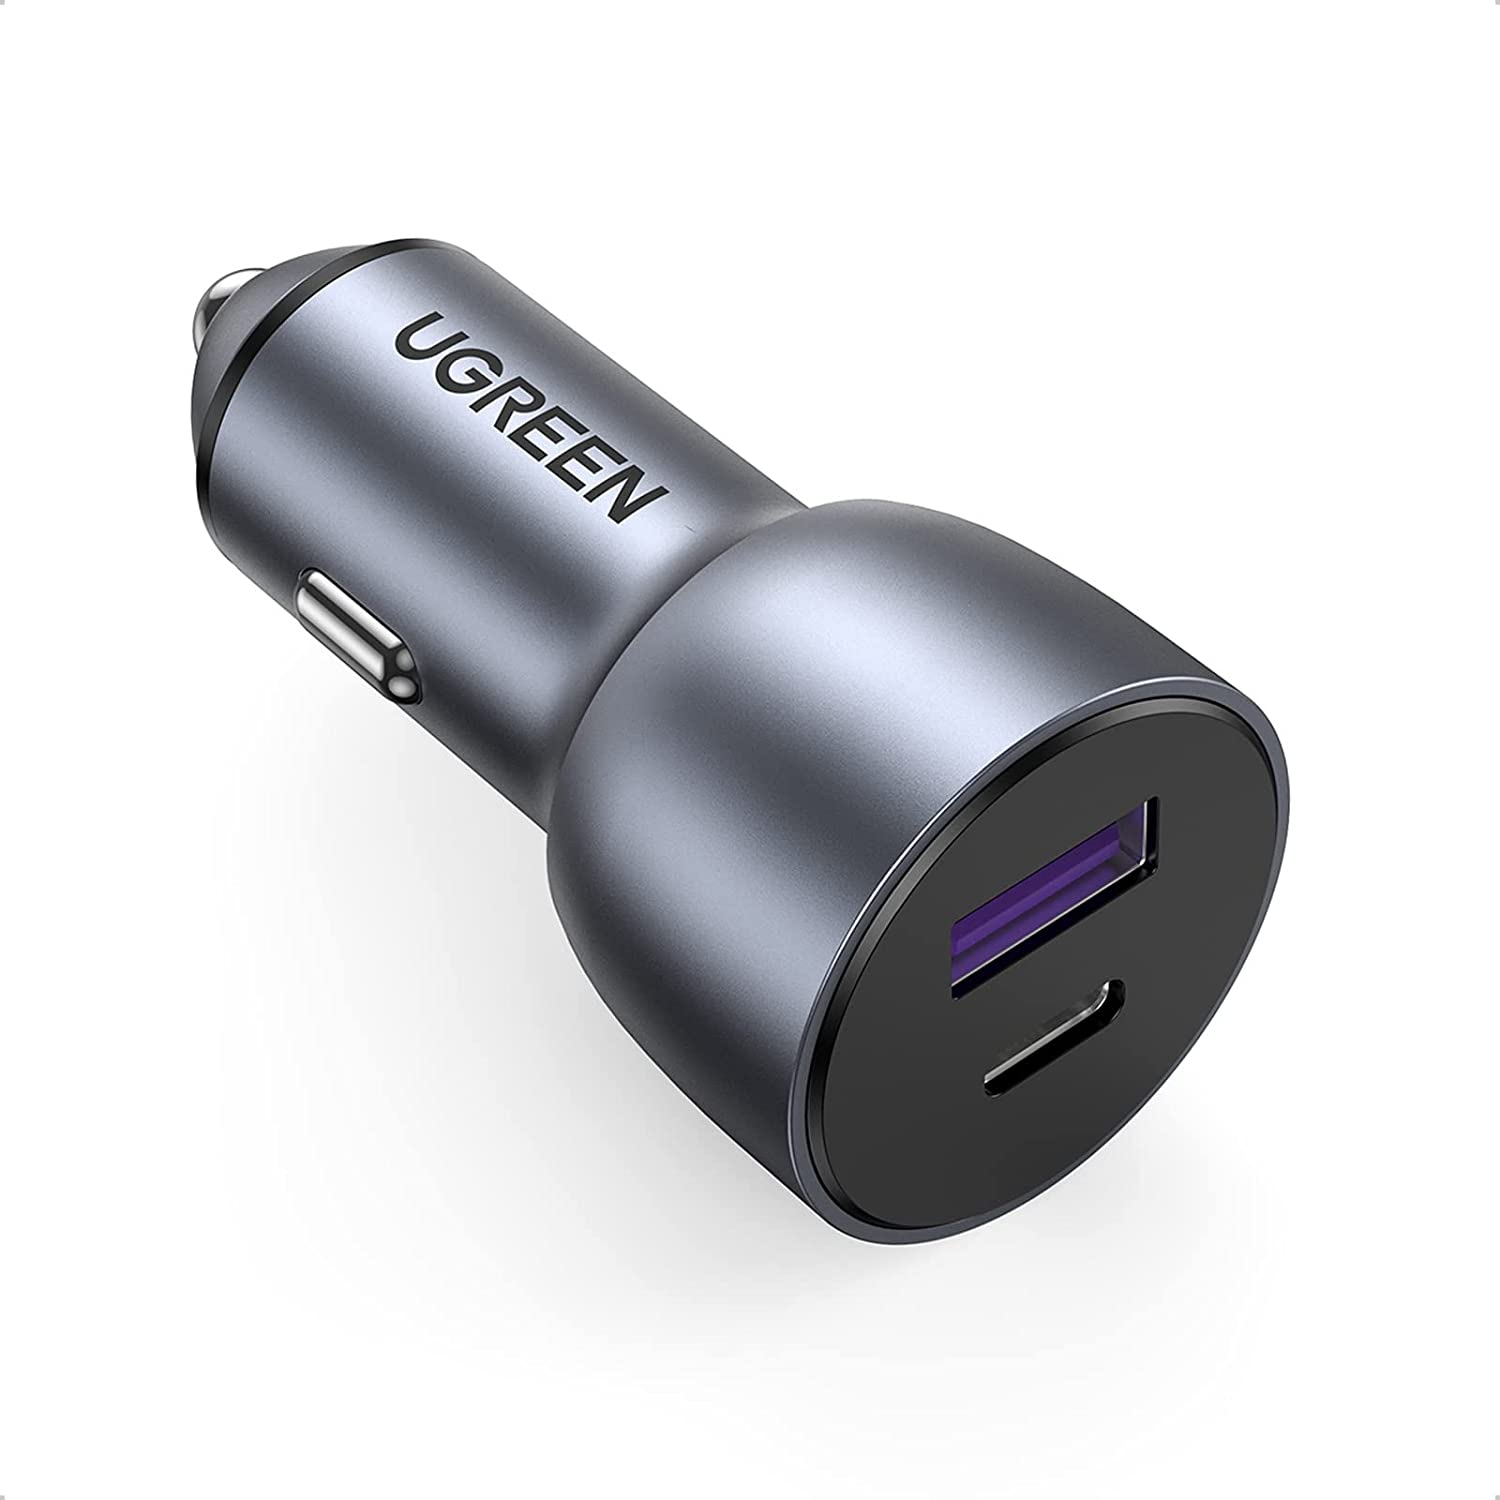 UGREEN USB C Car Charger, PD 20W & QC18W Fast Car Charger Adapter